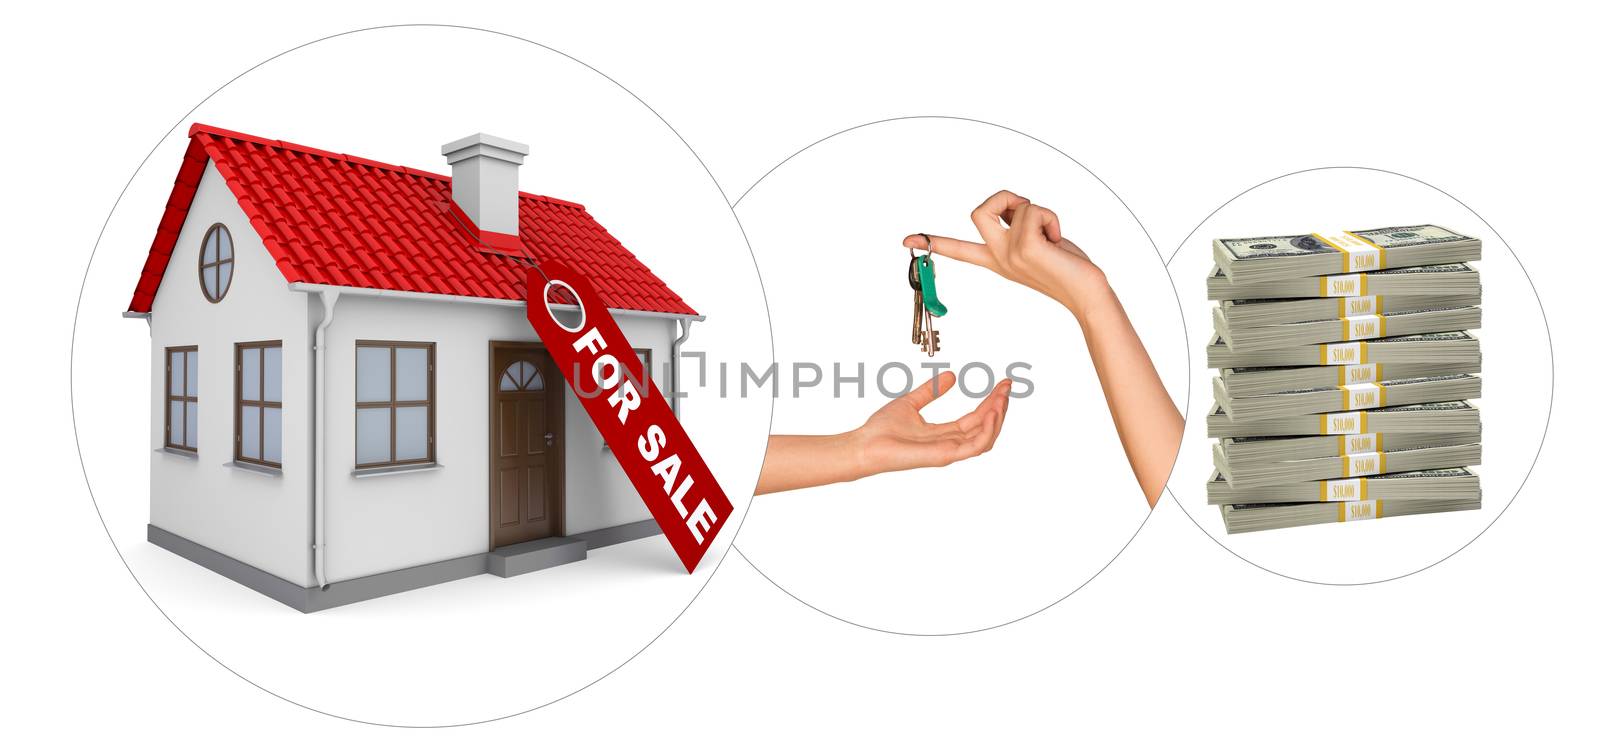 House for sale with keys and stack of money on isolated white background